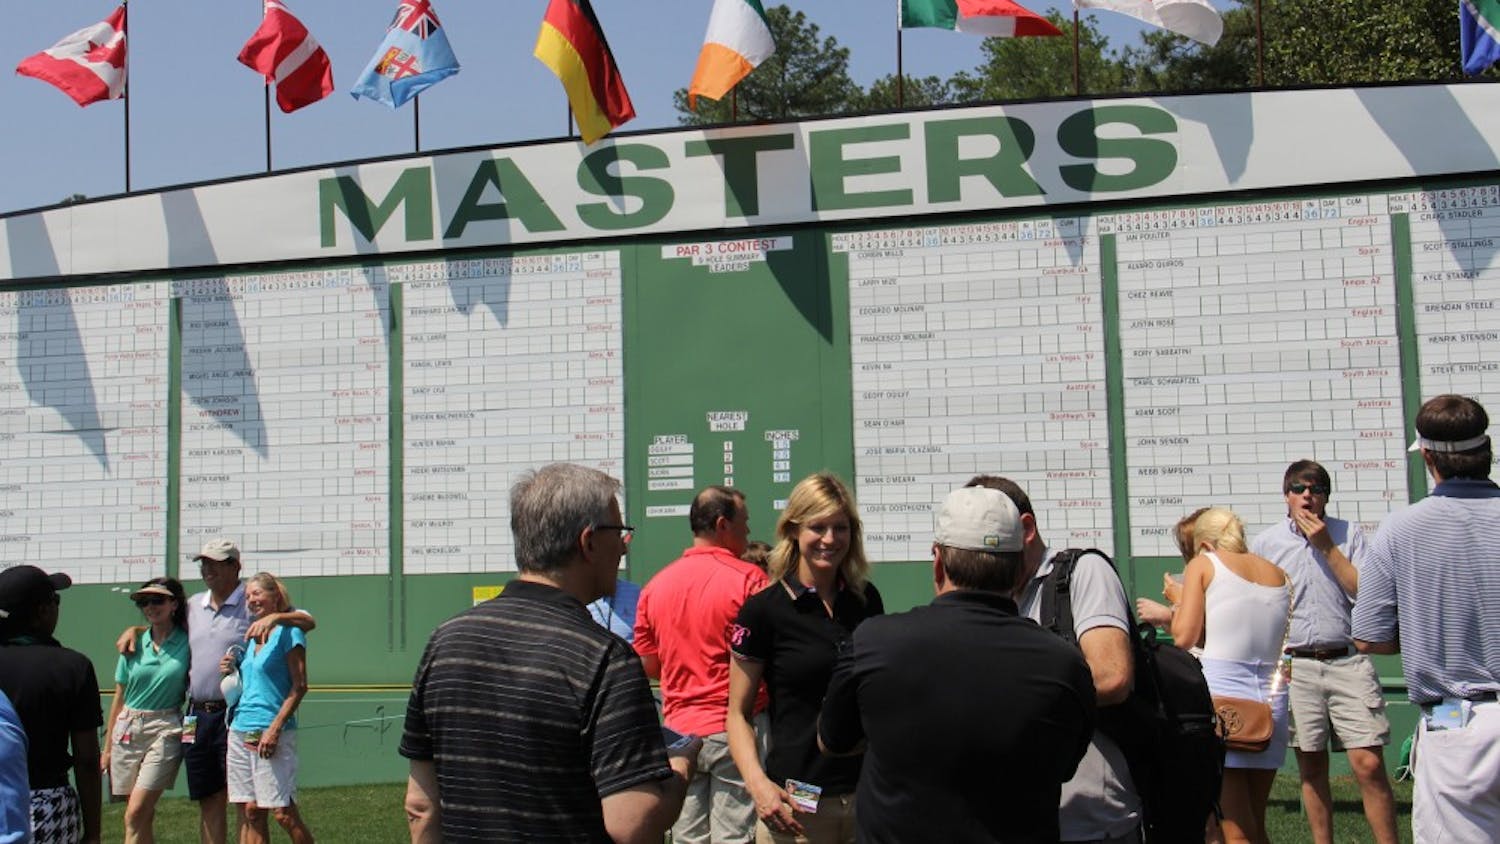 	Augusta National Golf Club has hired more than 450 students from USC whose duties include supervising concessions and running merchandising operations at the Masters.